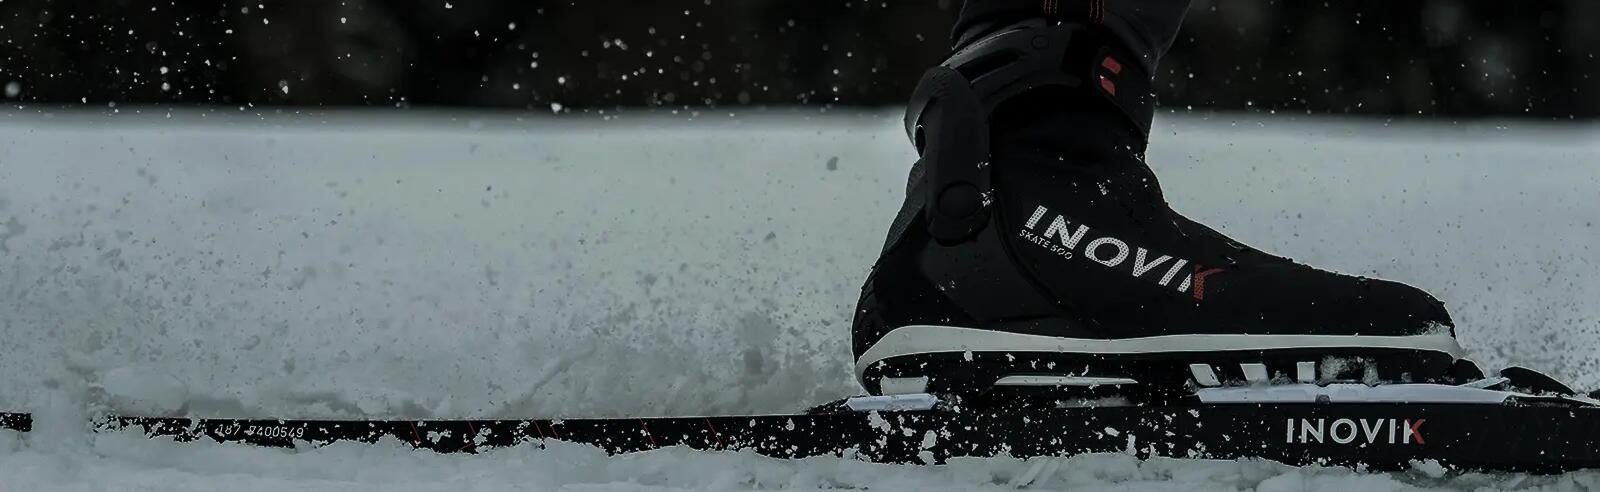 find out everything about cross-country skiing with the INOVIK glossary by Decathlon